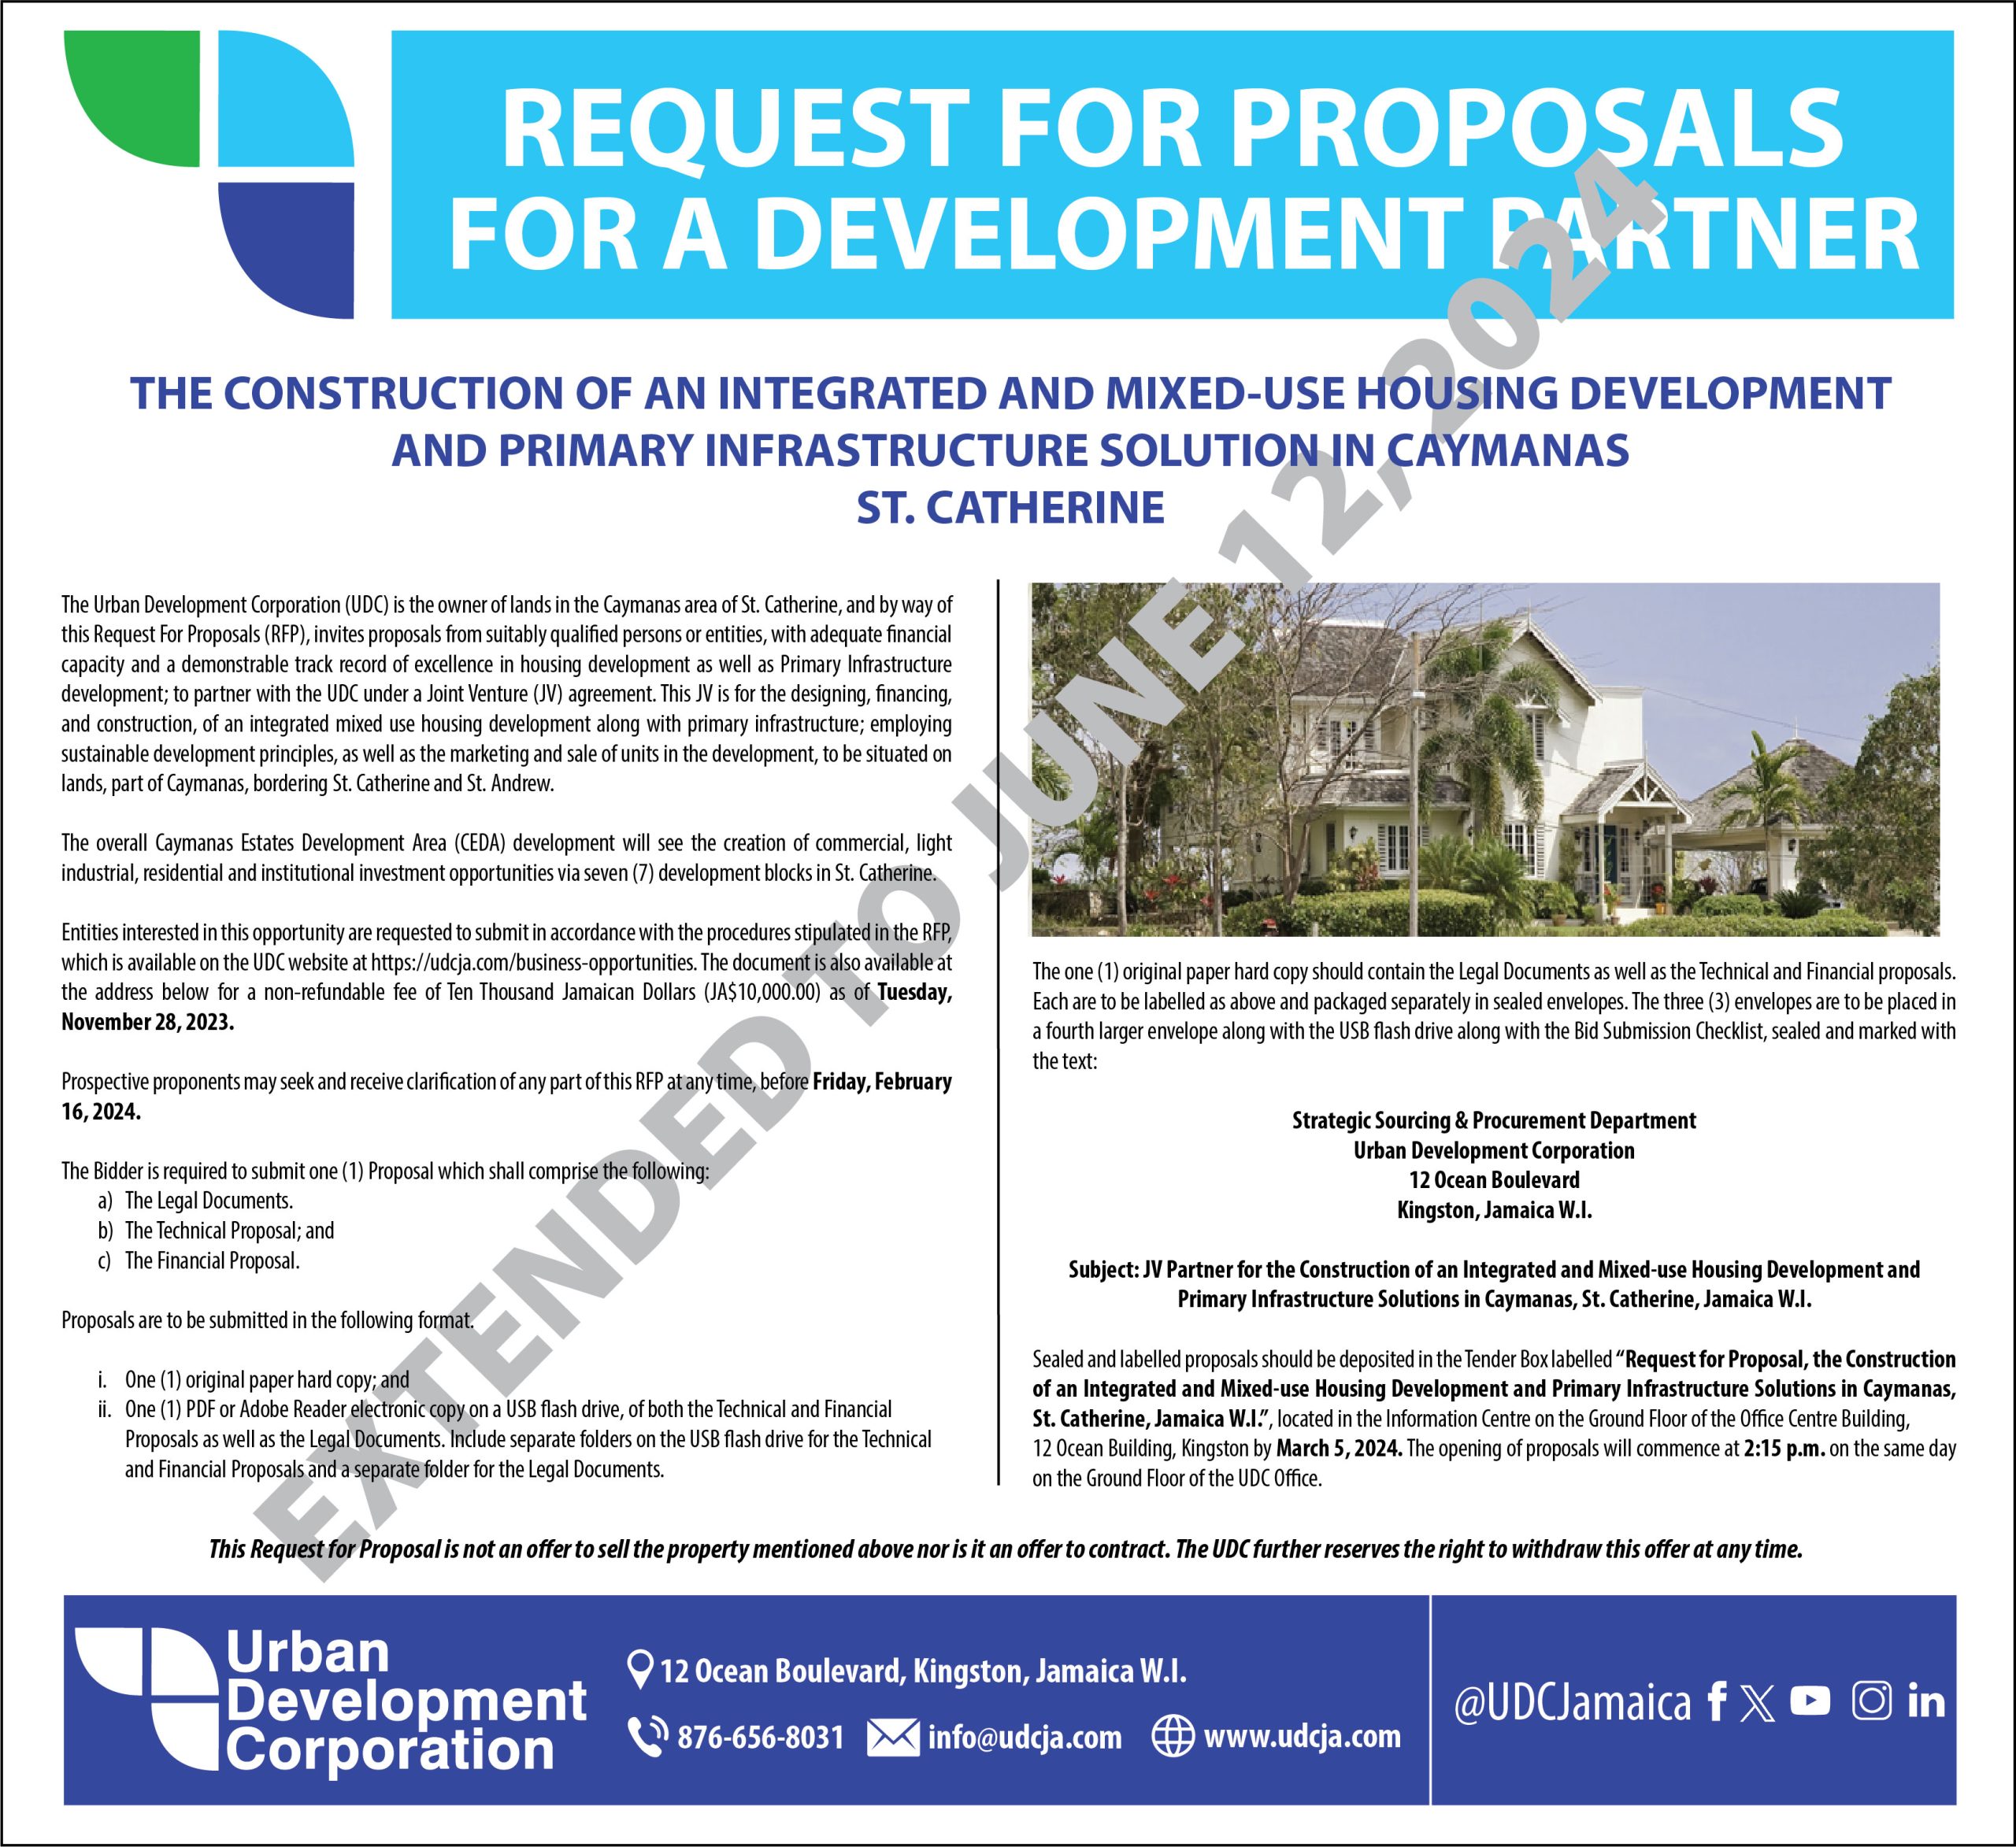 REQUEST FOR PROPOSALS FOR A JOINT PARTNER EXTENDED